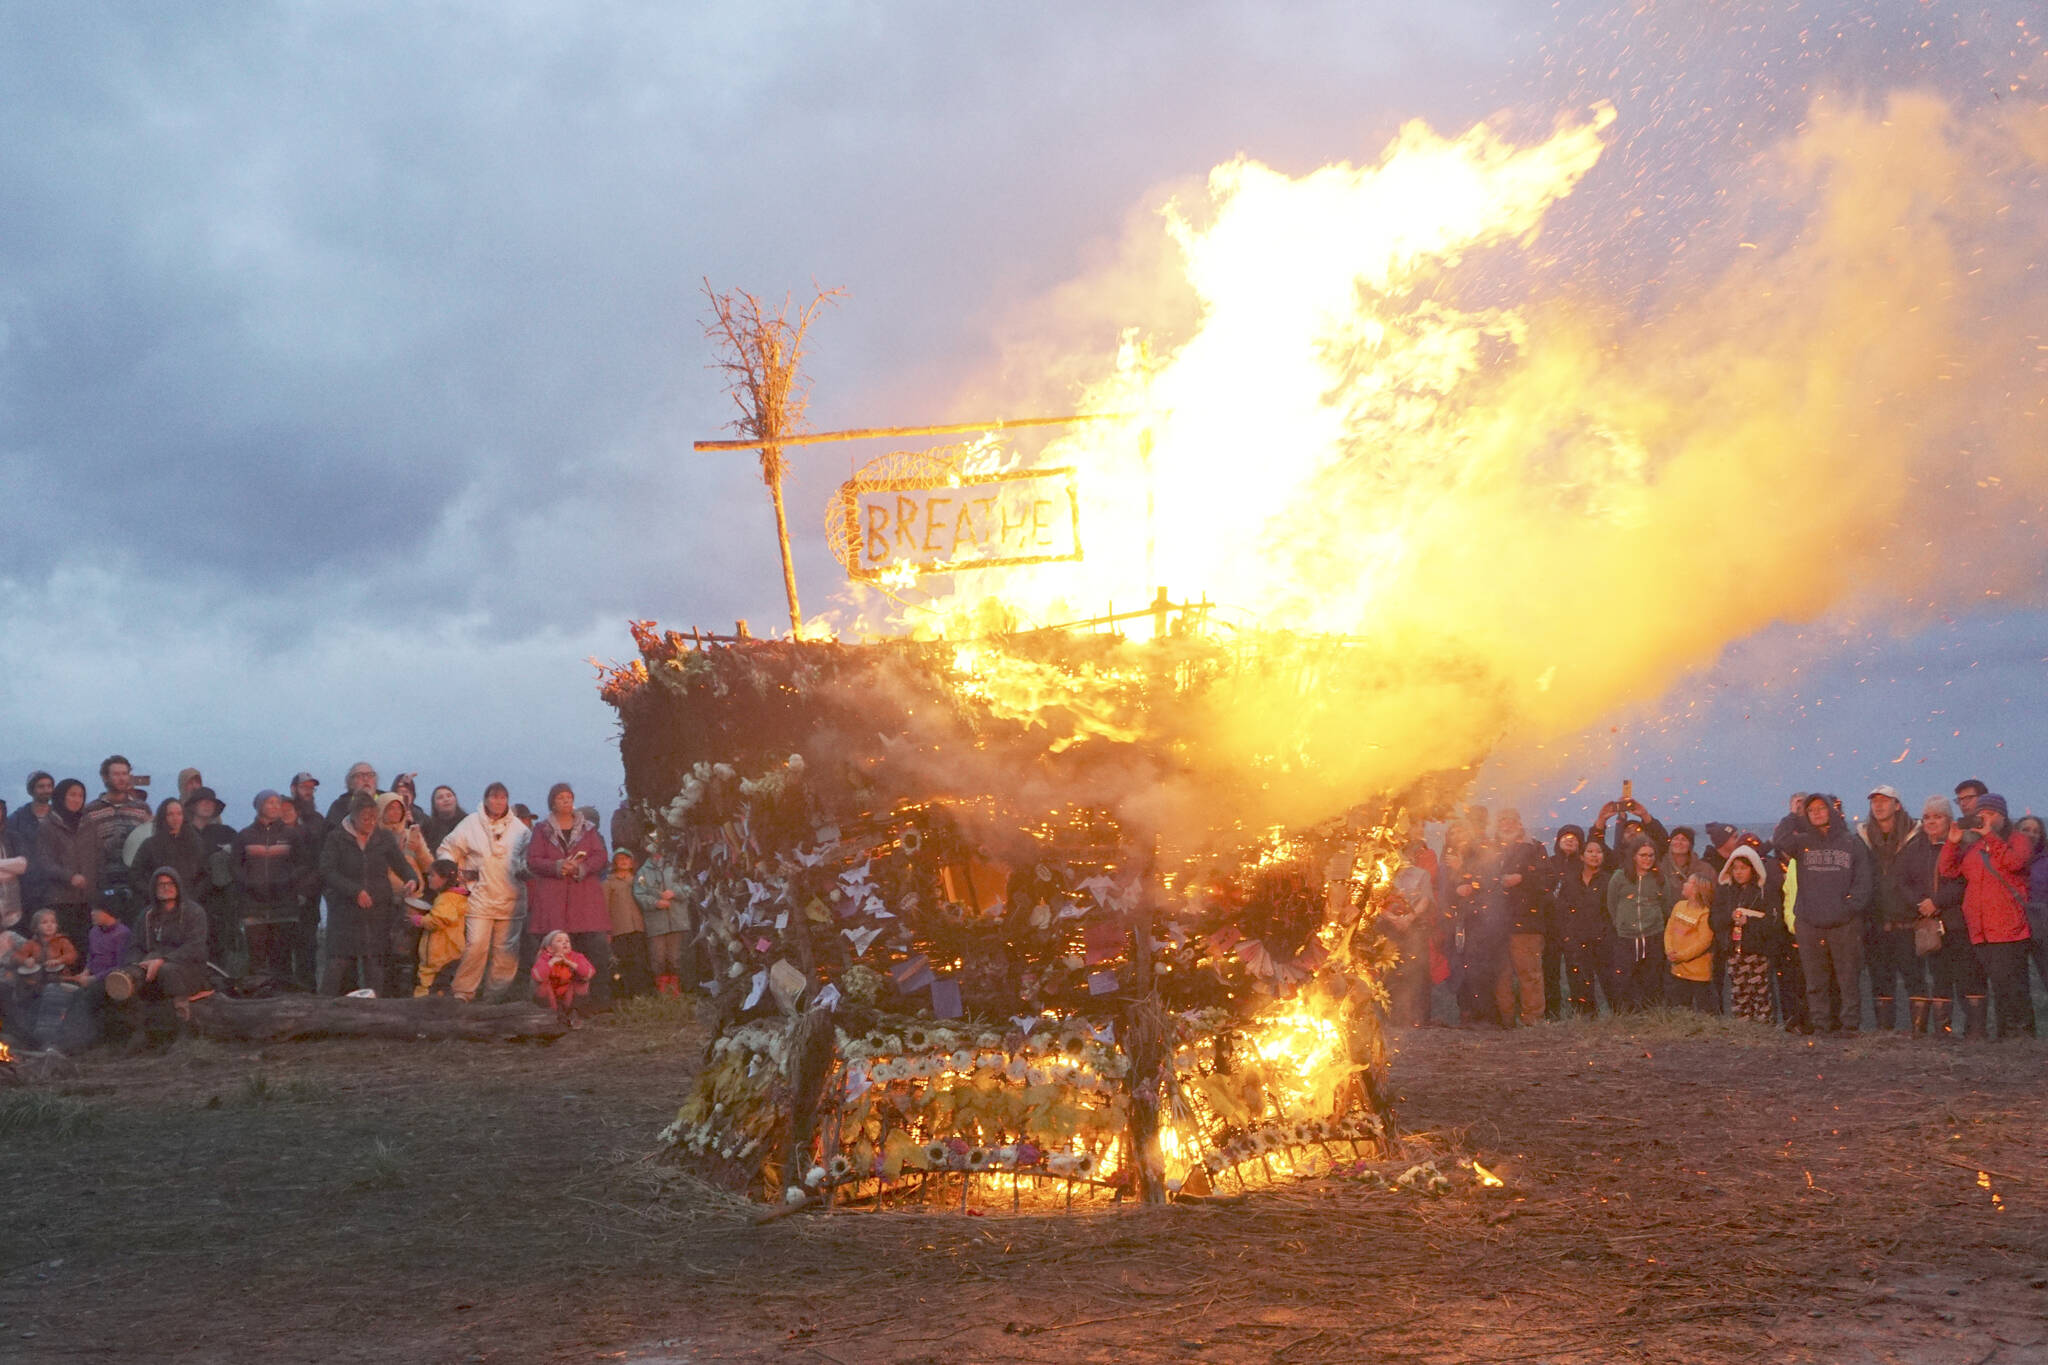 As about 200 people watch, the 19th annual Burning Basket, “Breathe,” catches fire on Sunday, Sept. 11, 2022, at Mariner Park on the Homer Spit in Homer, Alaska. (Photo by Michael Armstrong/Homer News)